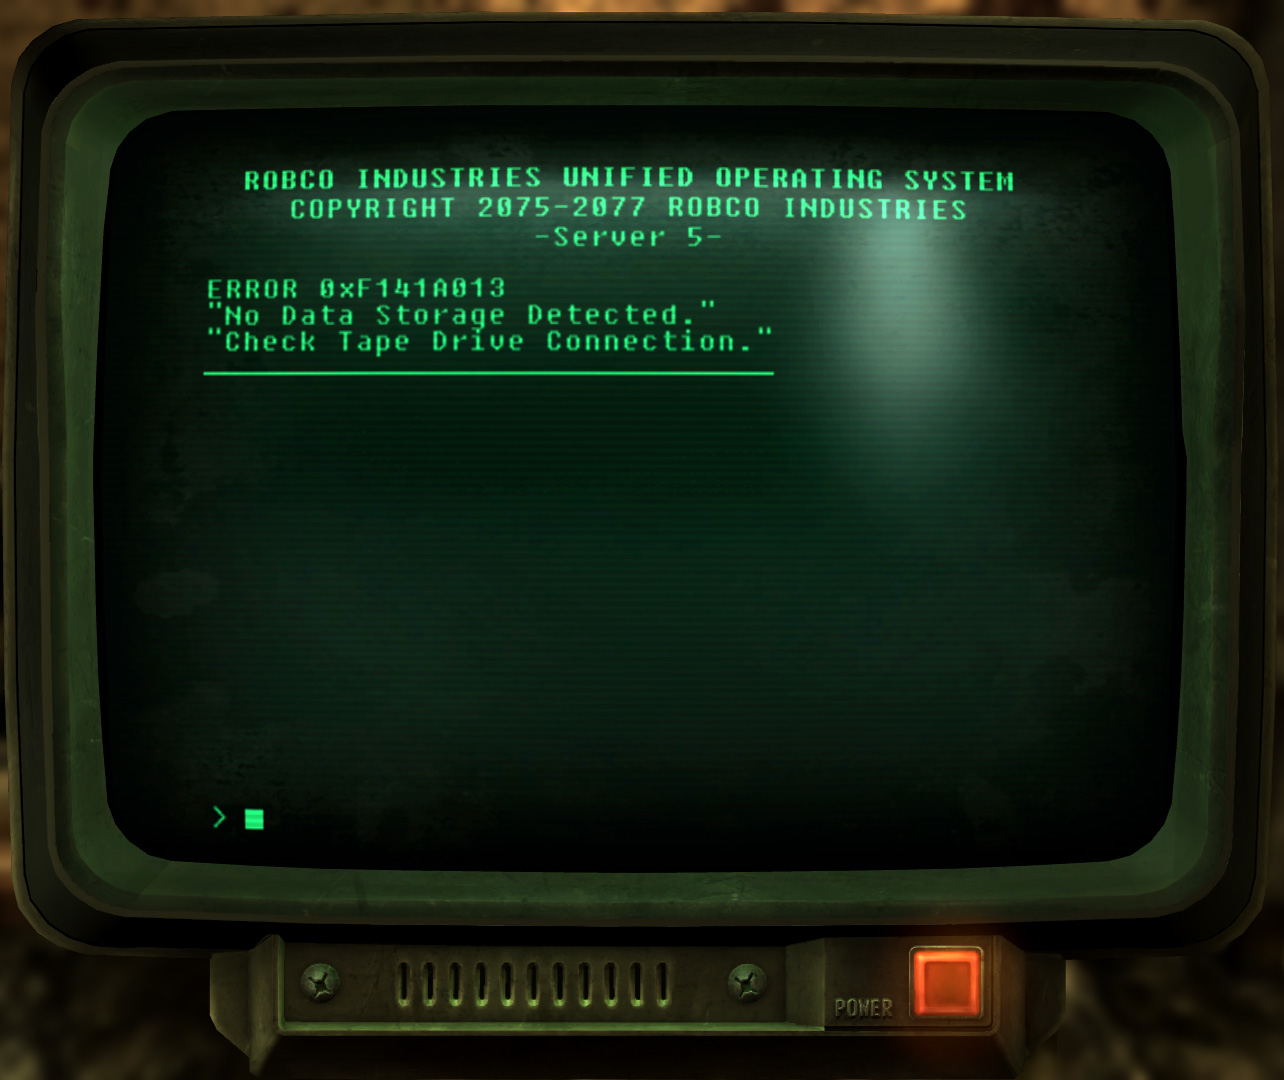 fallout new vegas controls pc hacking quit before lockout